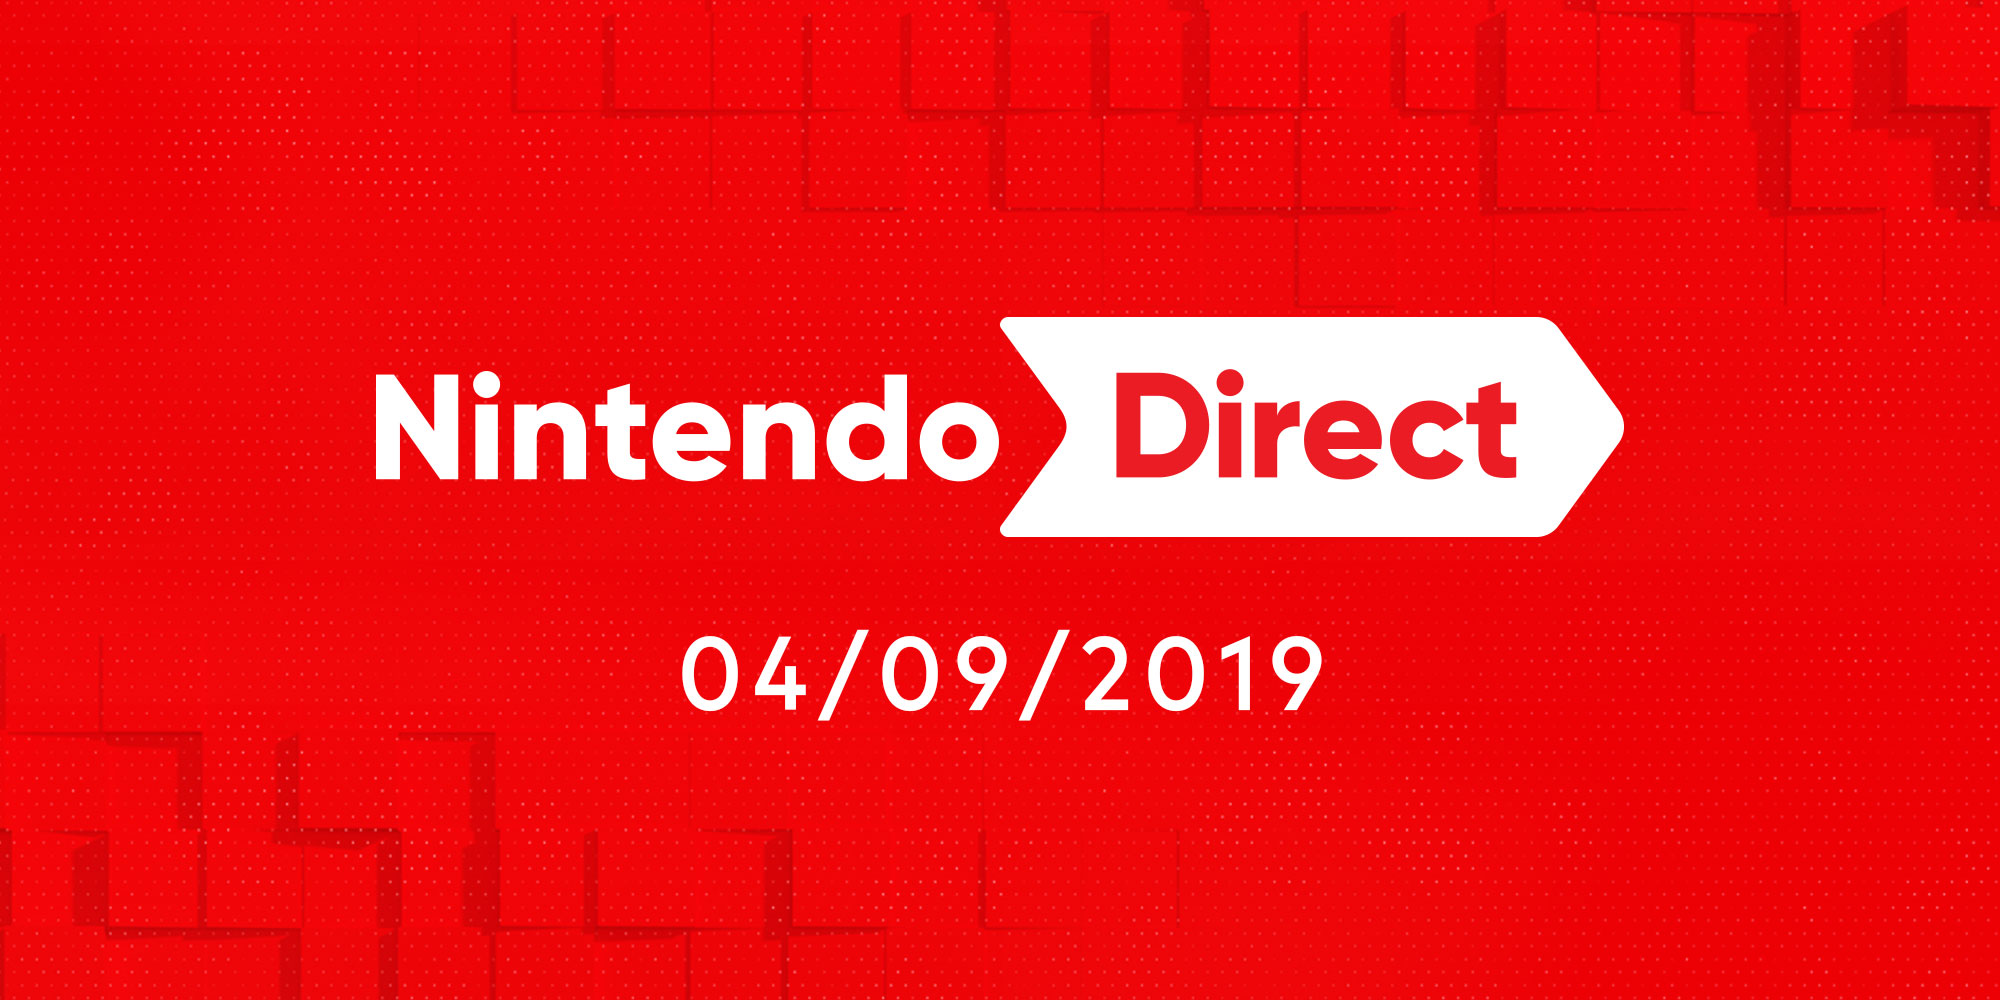 Xenoblade Chronicles: Definitive Edition, Overwatch Legendary Edition and more announced for Nintendo Switch in the latest Nintendo Direct!